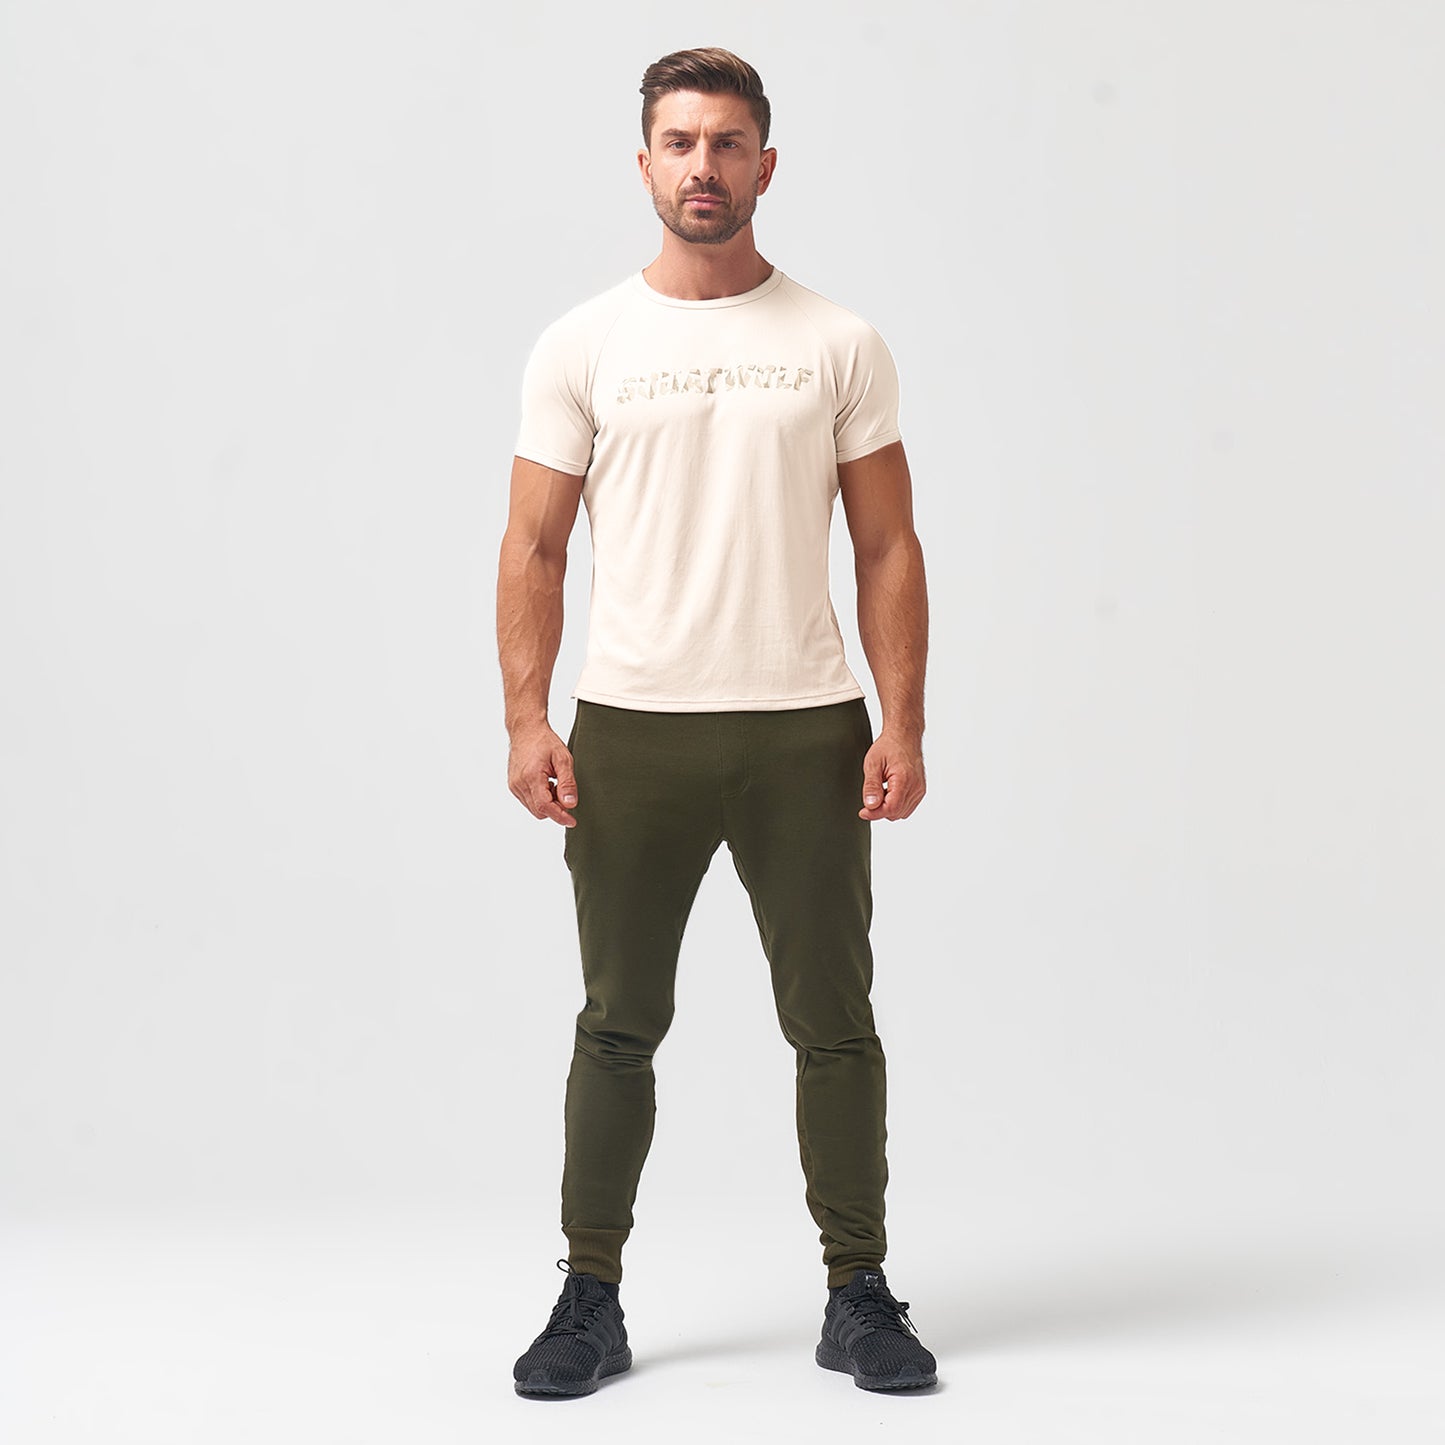 squatwolf-gym-wear-code-muscle-tee-cobblestone-workout-shirts-for-men